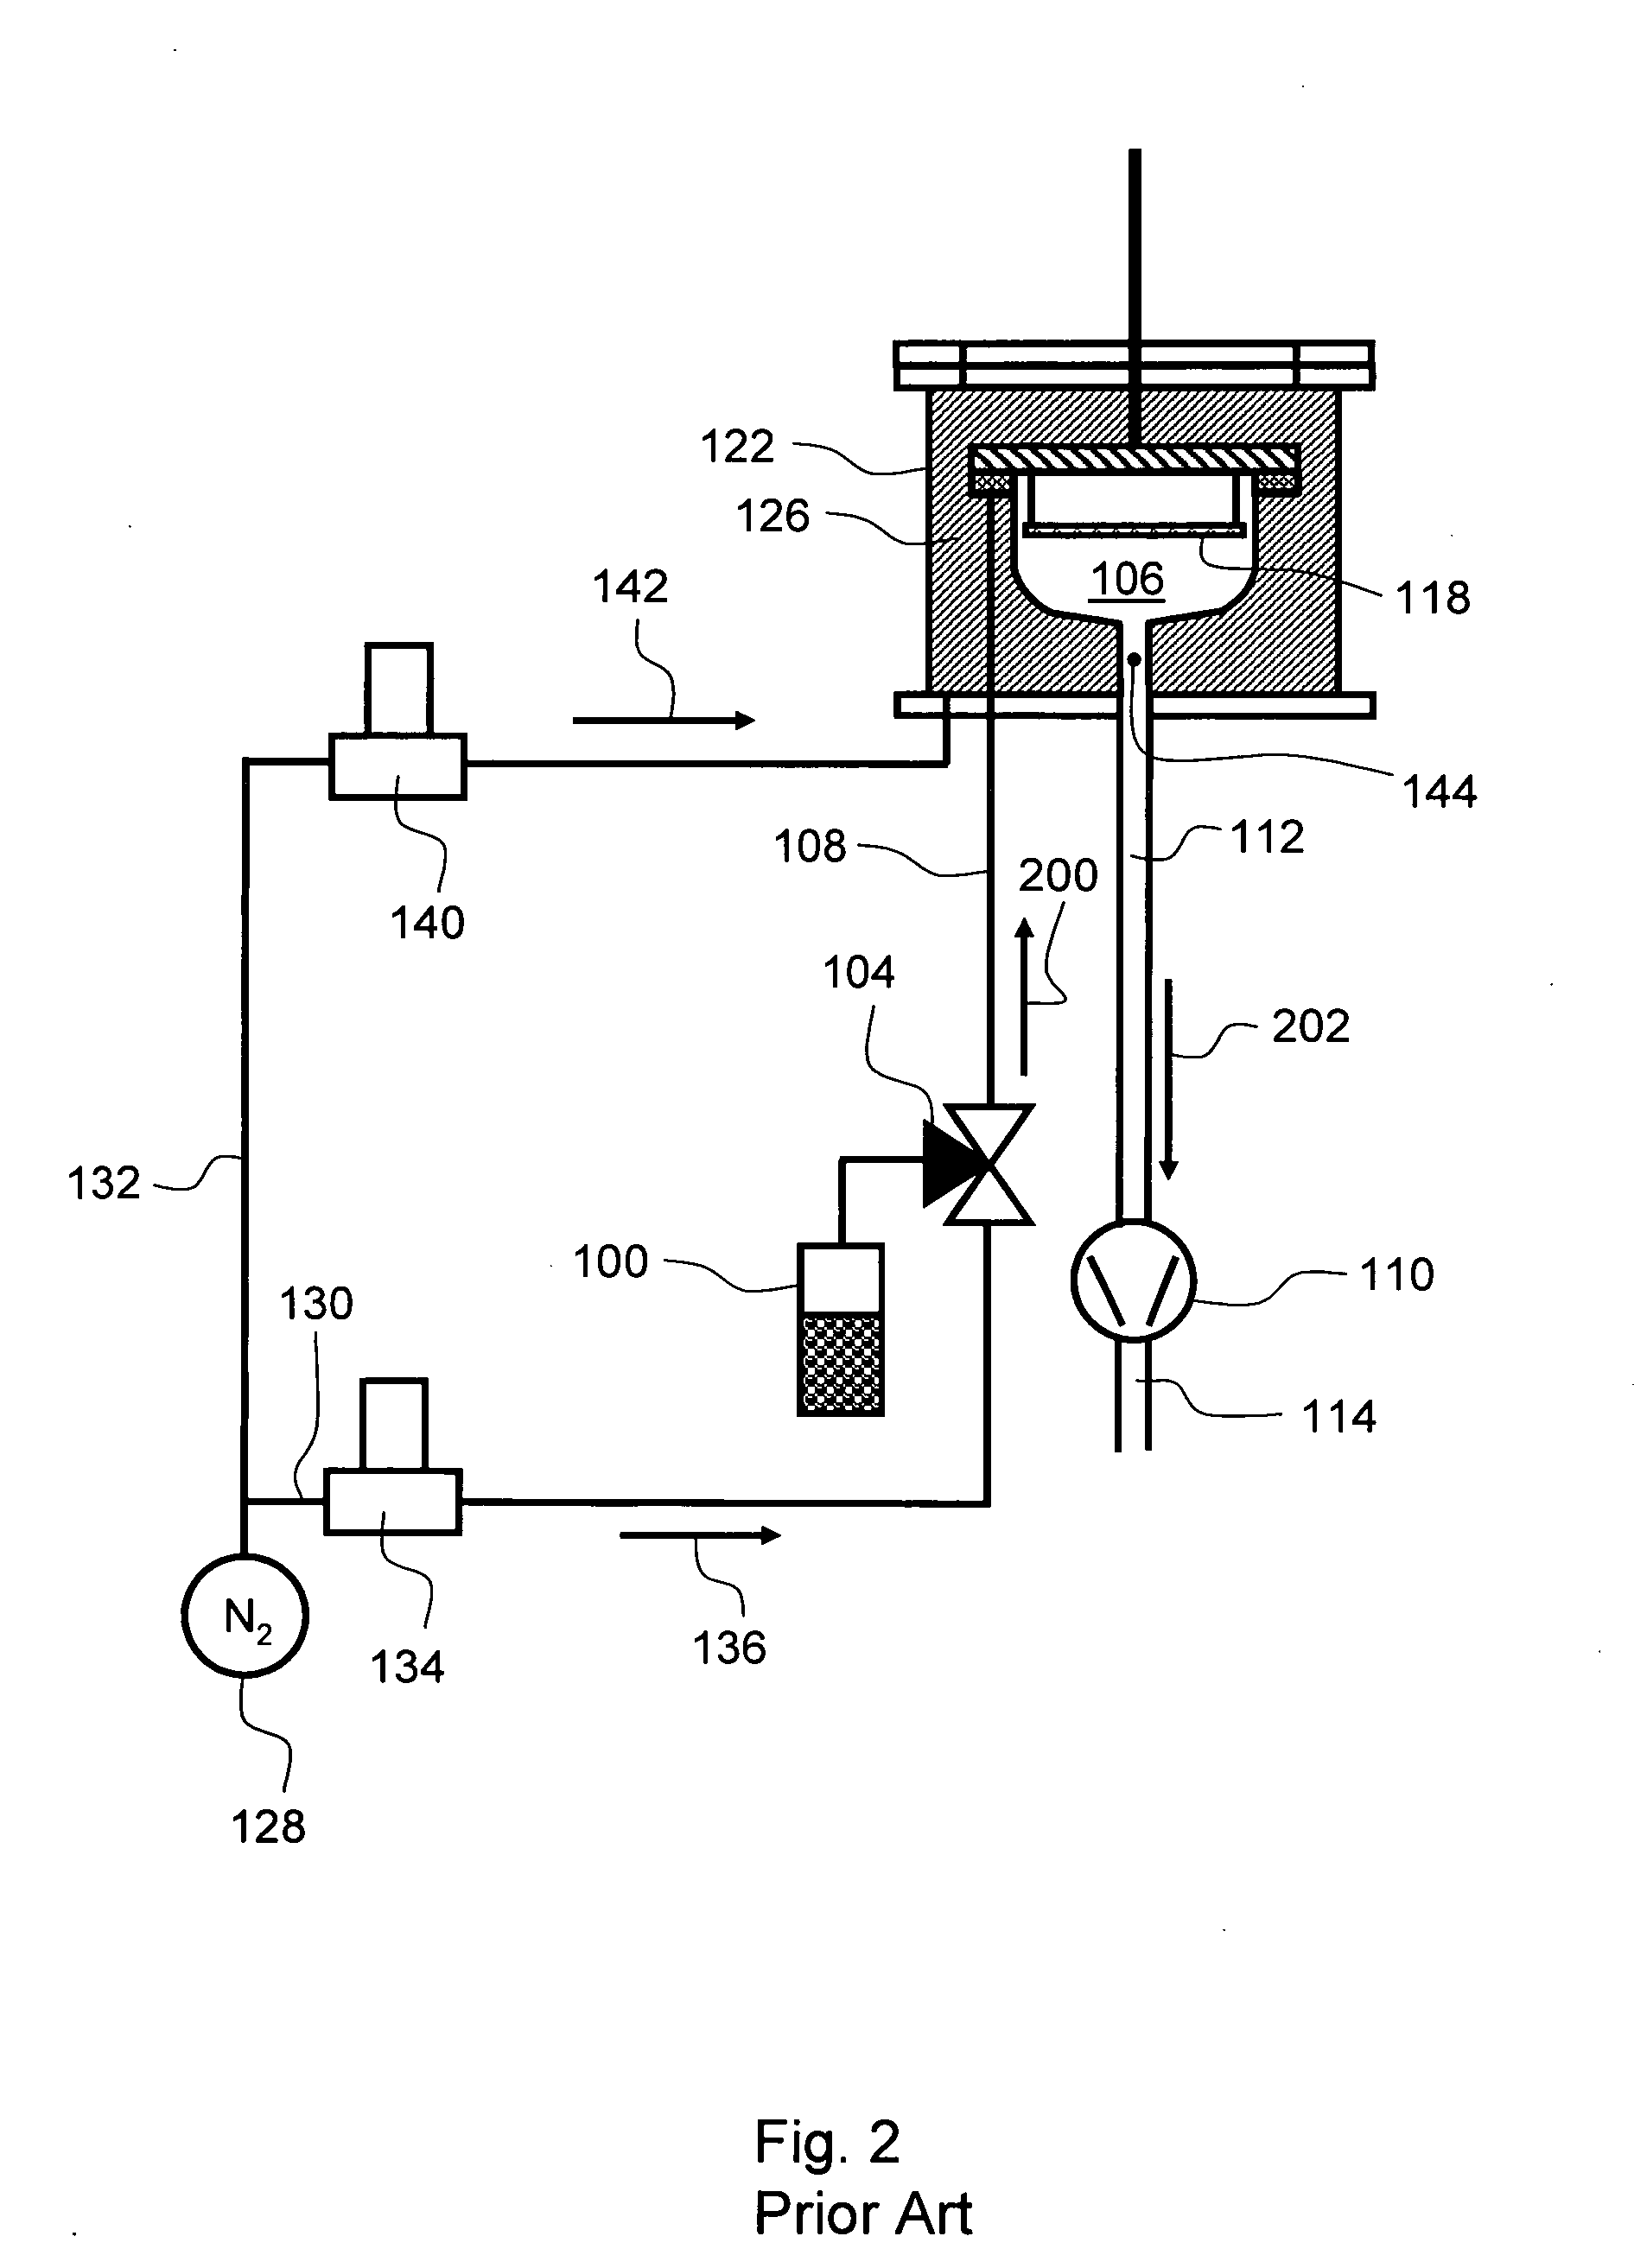 Apparatus and methods for deposition reactors